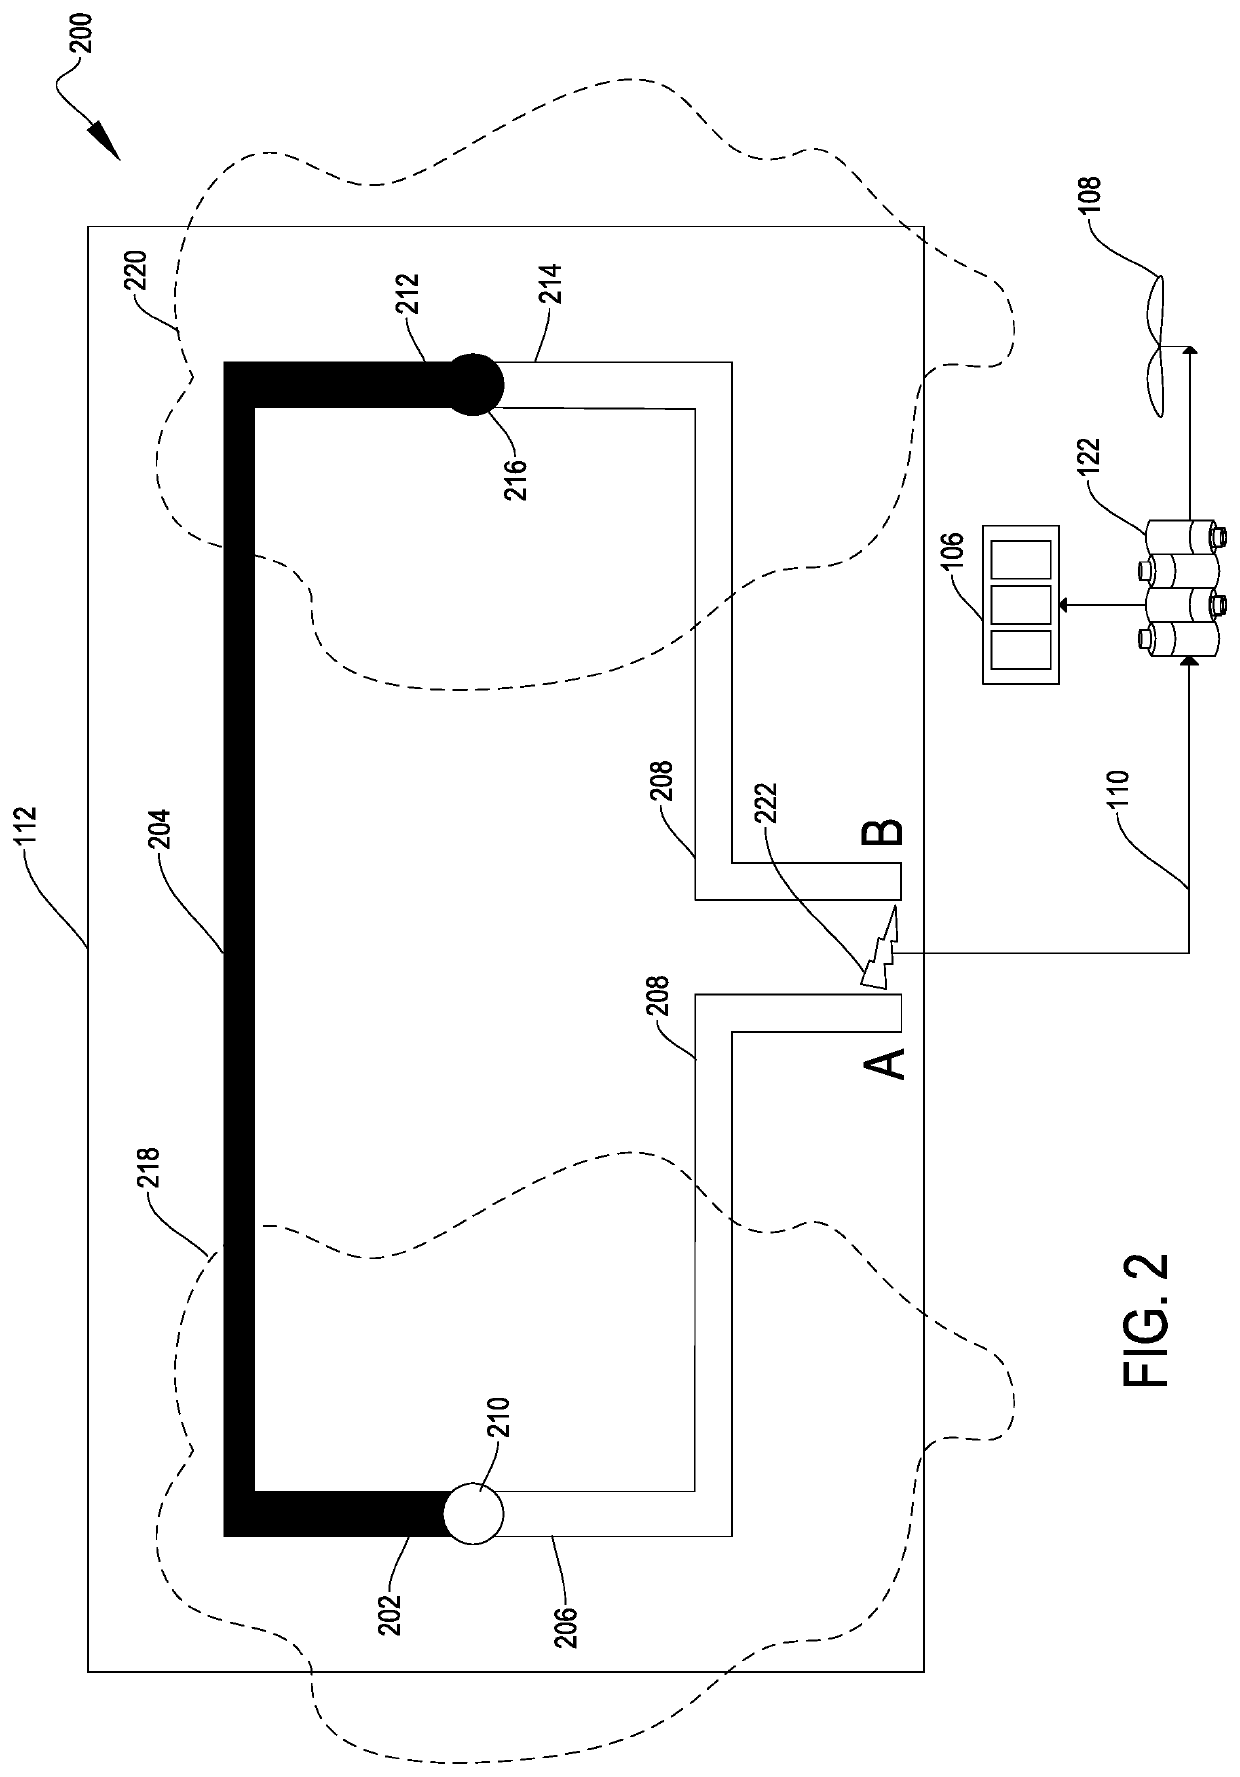 Hydrothermal vent energy harvesting, storage, and power distribution system